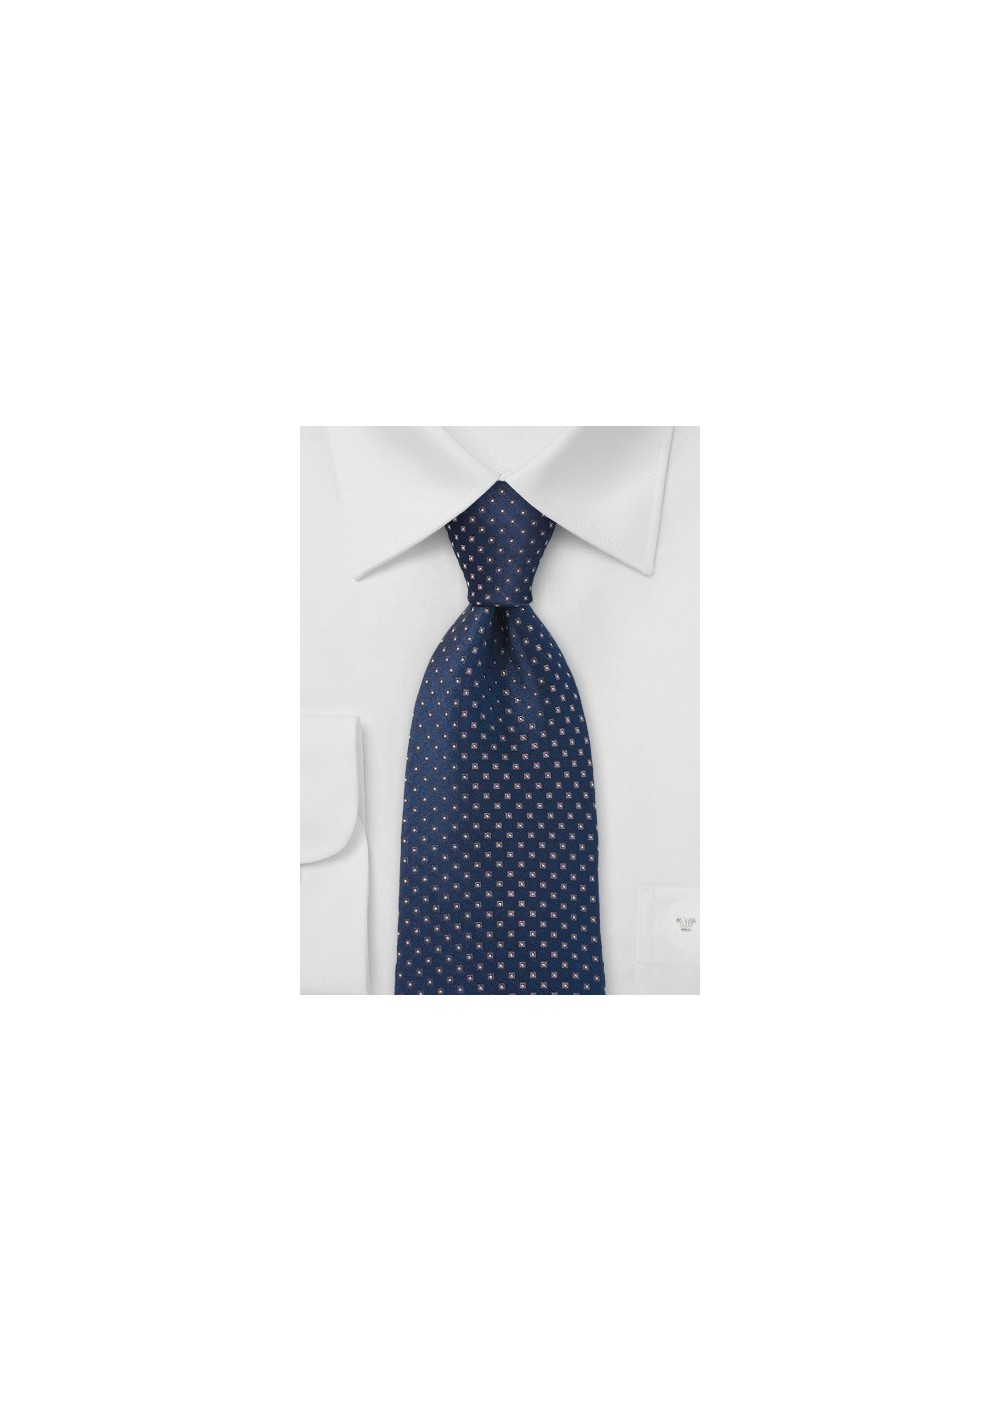 Navy and Brown Patterned Tie